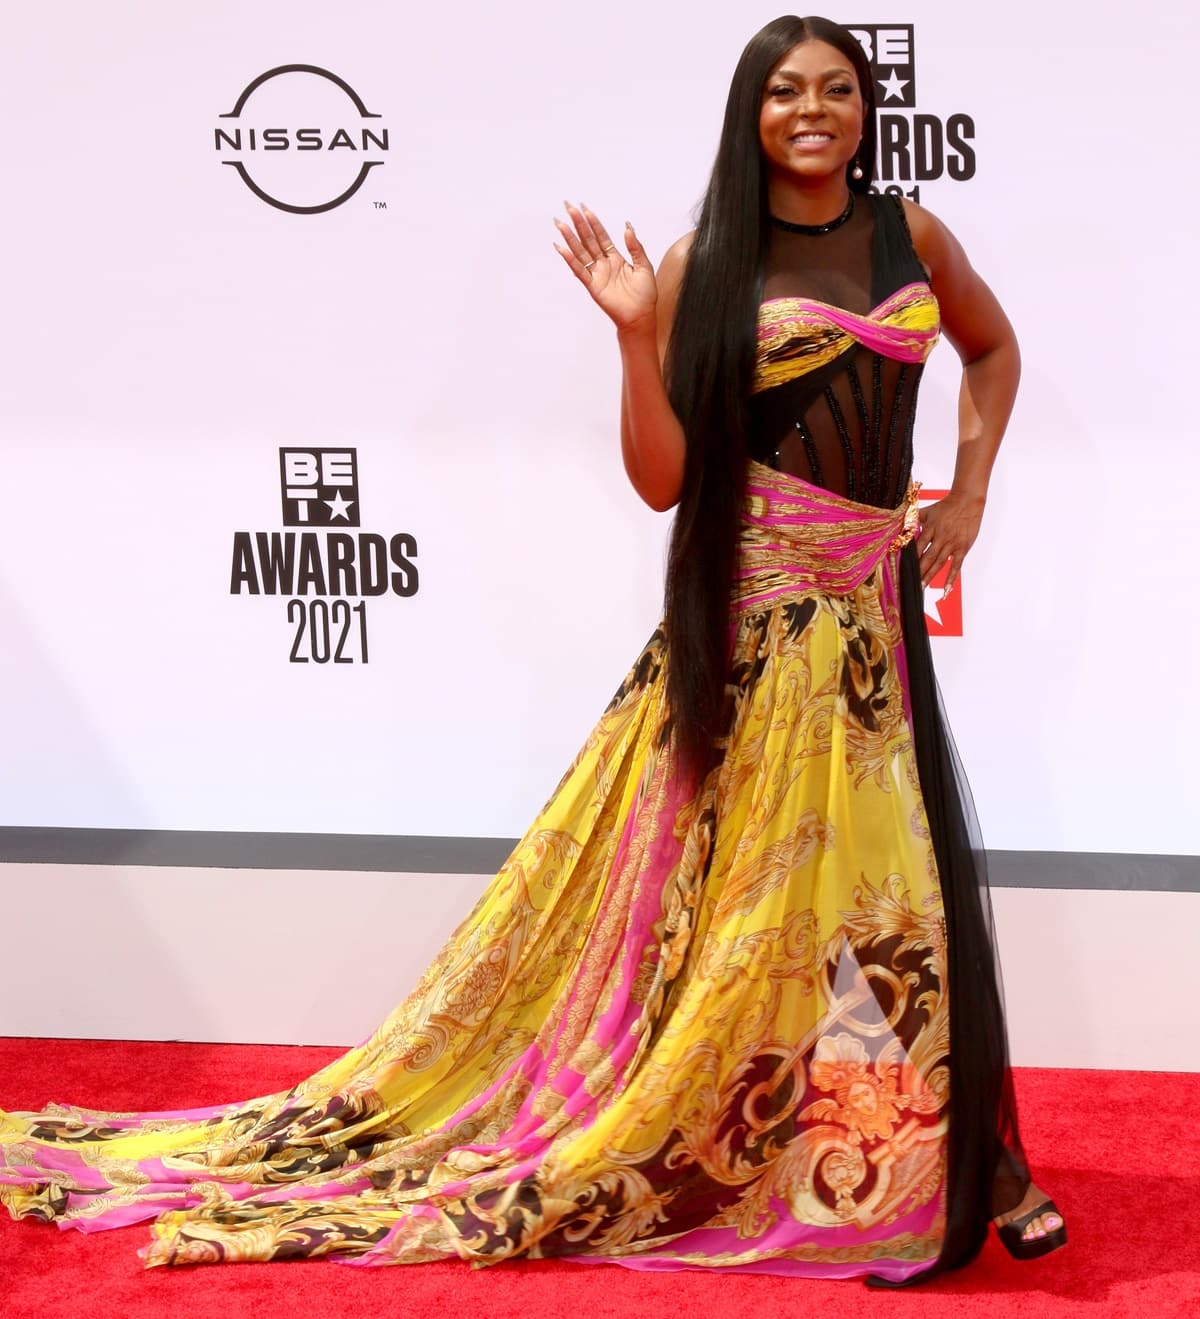 Taraji P. Henson turned heads in a stunning Versace dress, expertly styled by Jason Bolden, at the 21st BET Awards